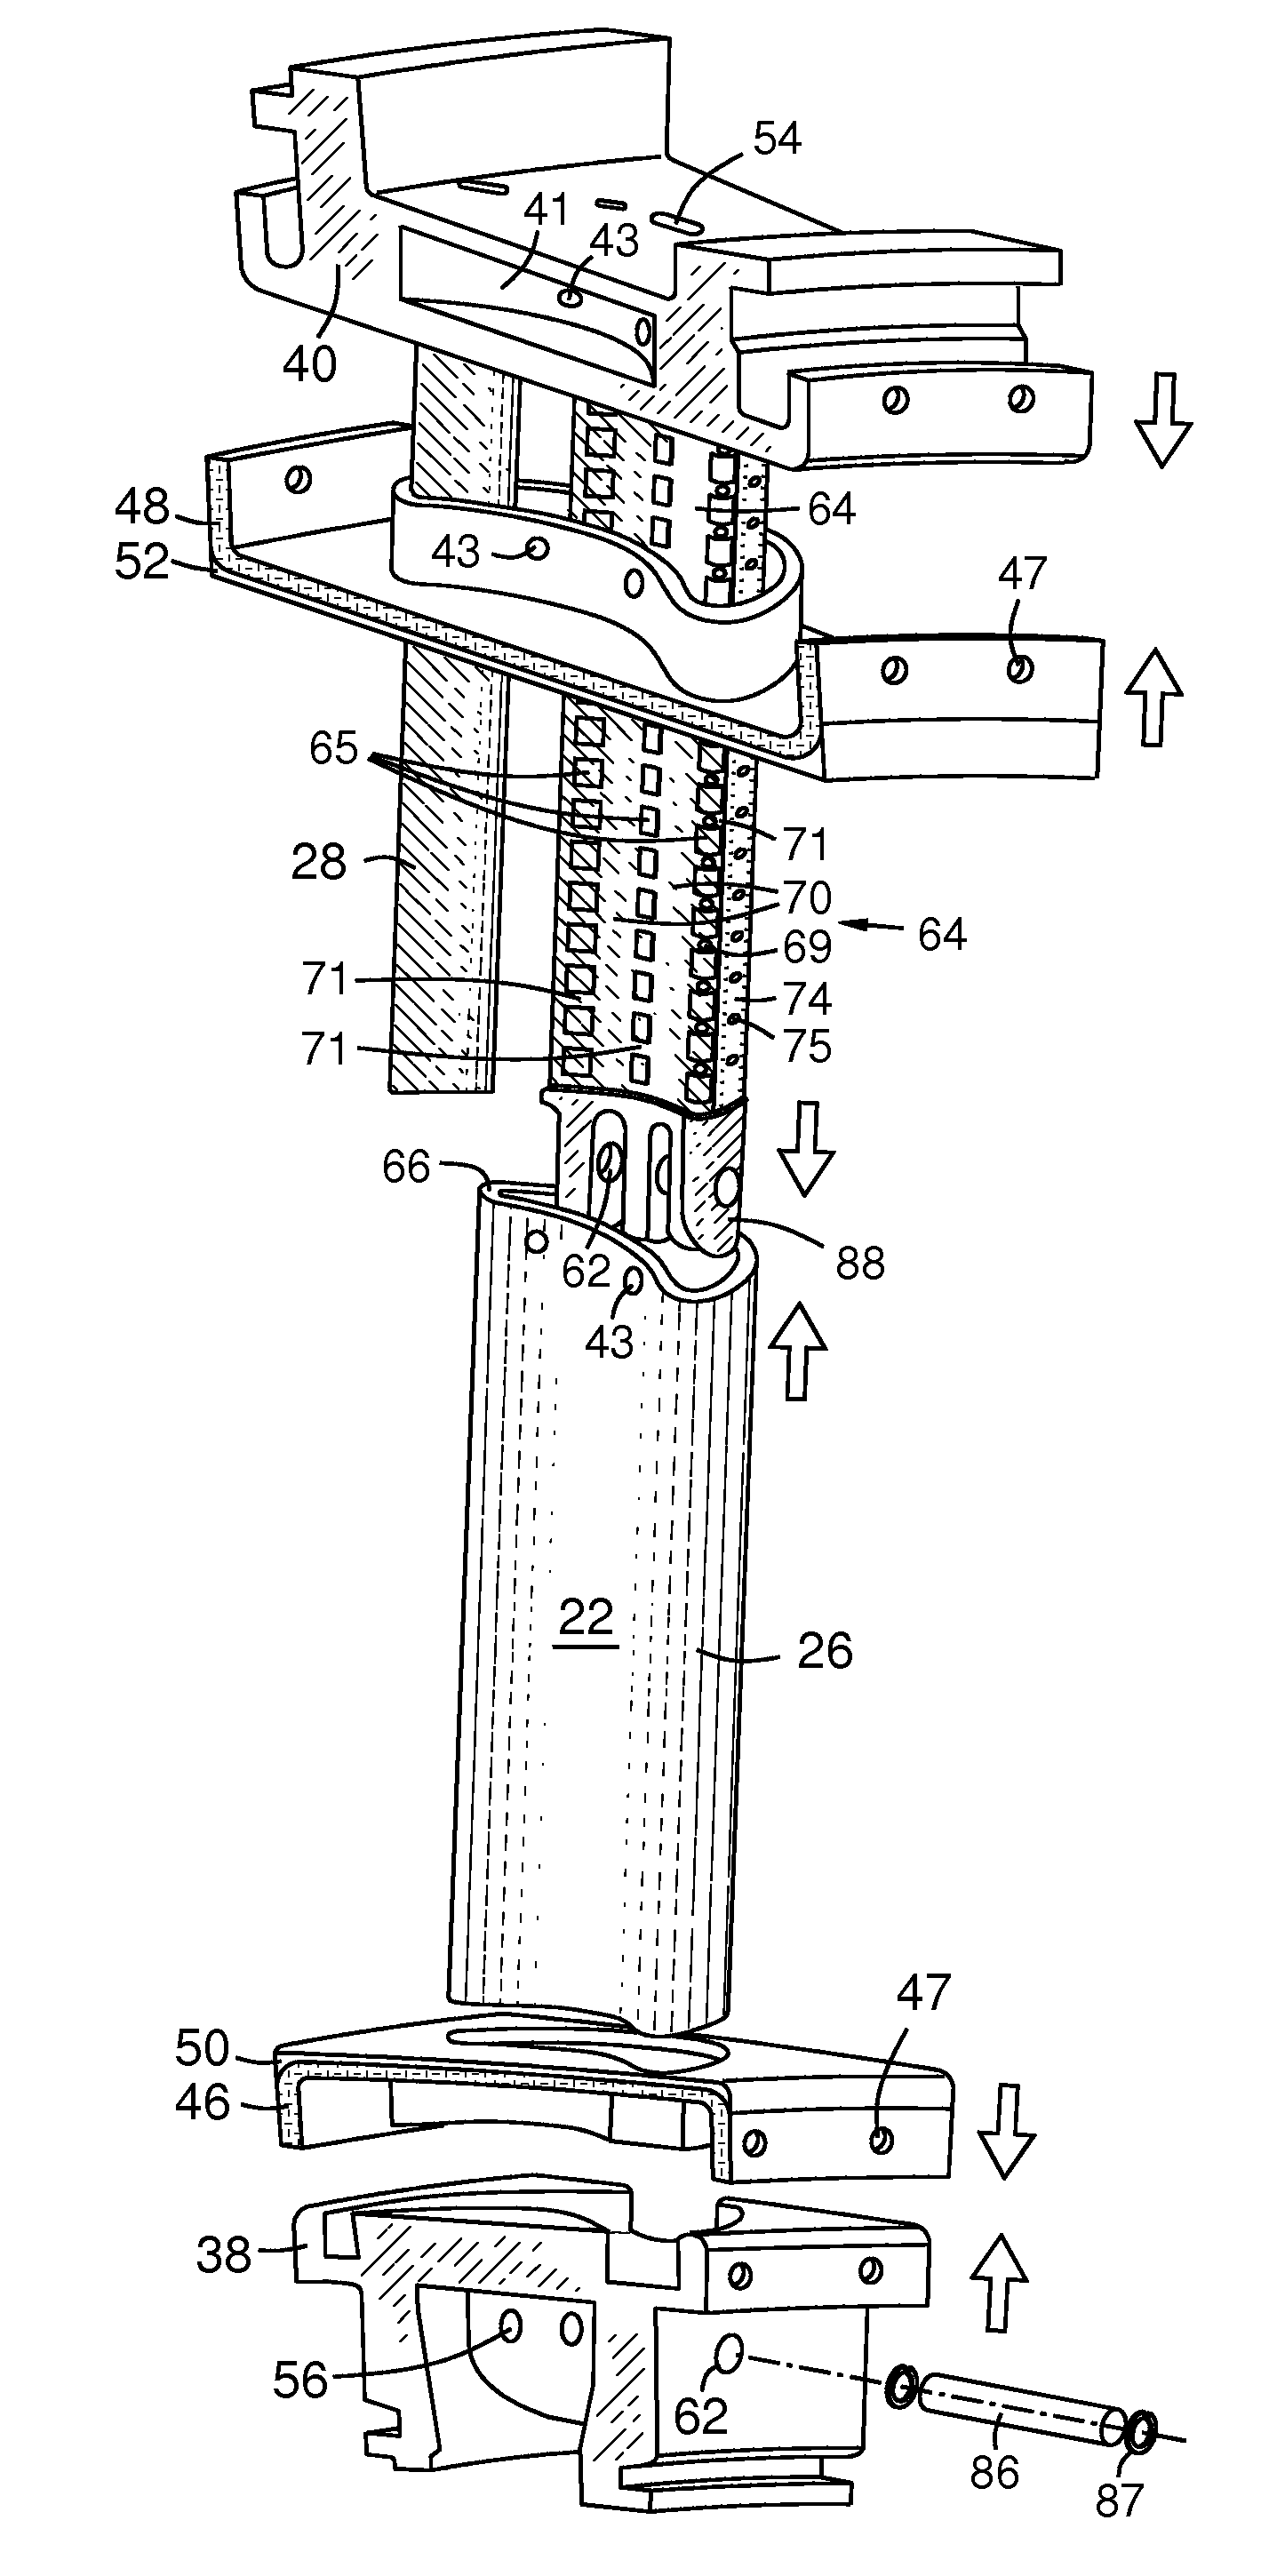 CMC vane assembly apparatus and method